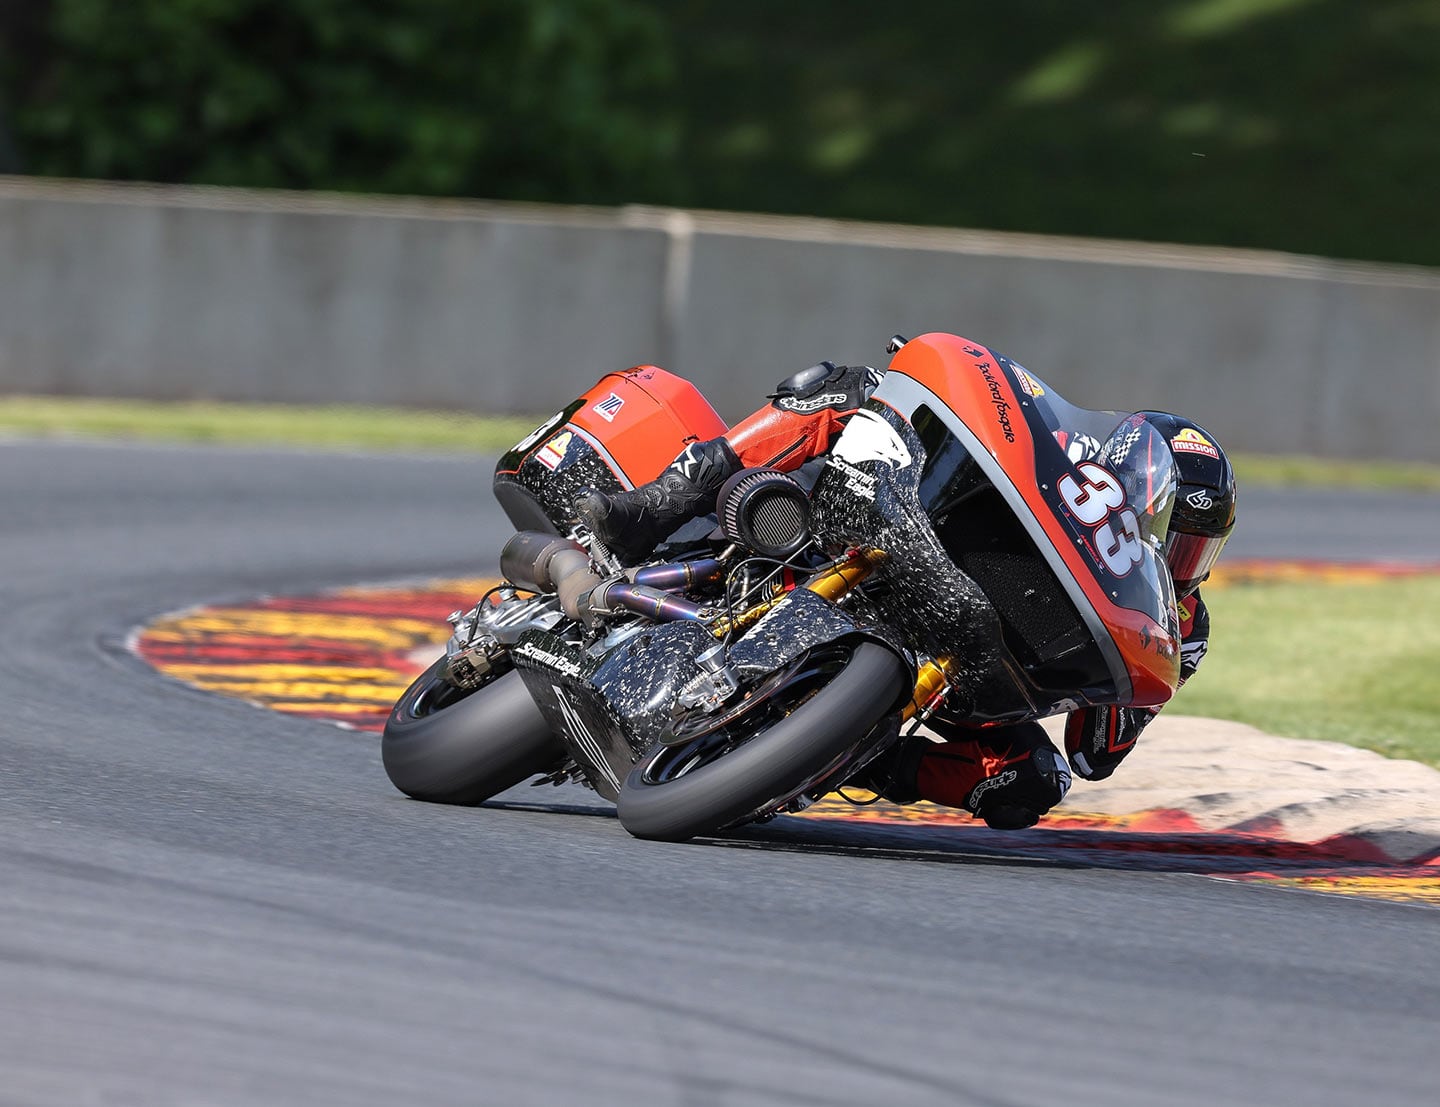 Harley-Davidson Factory rider Wyman slid by Herfoss at the finish line in Road America to win by just 0.039 second.